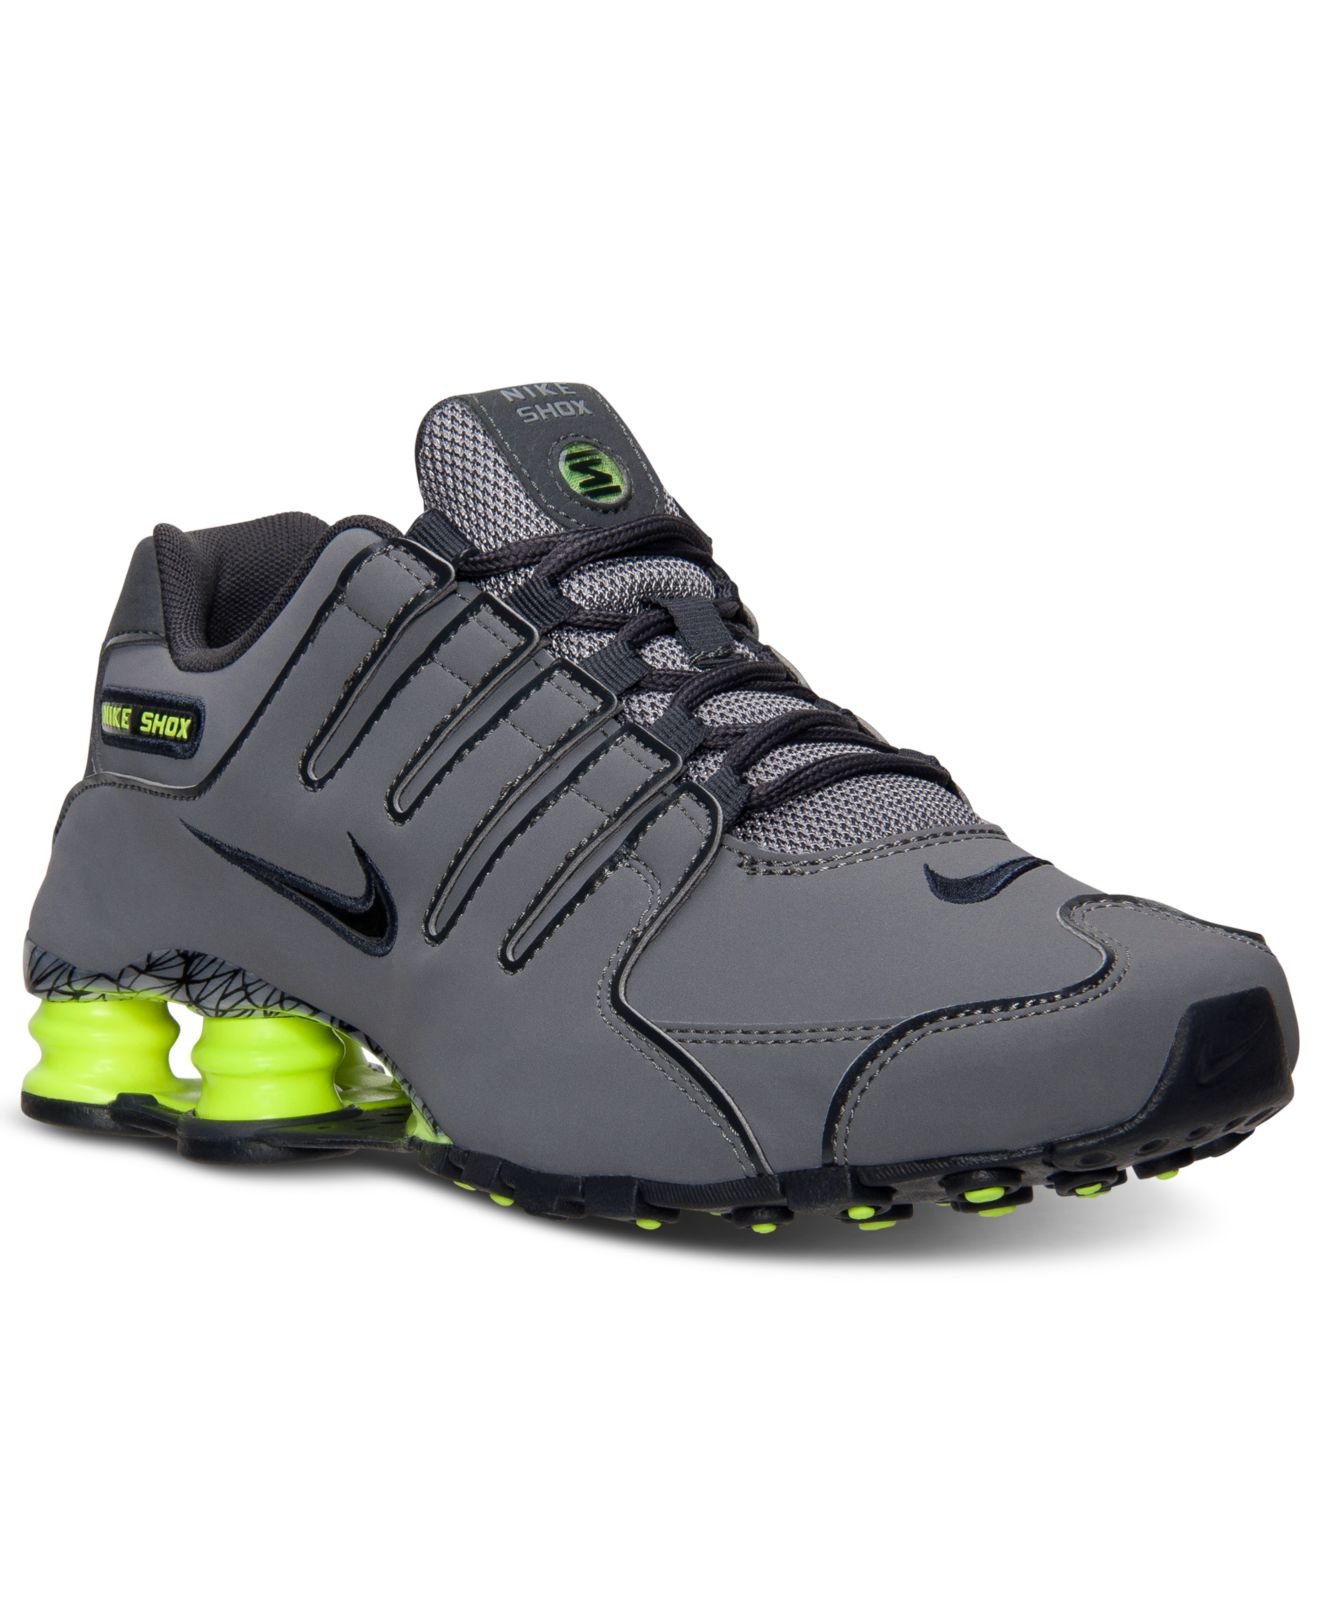 Nike Gray Mens Shox Nz Eu Running Sneakers From Finish Line Product 1 17401976 2 497837242 Normal 